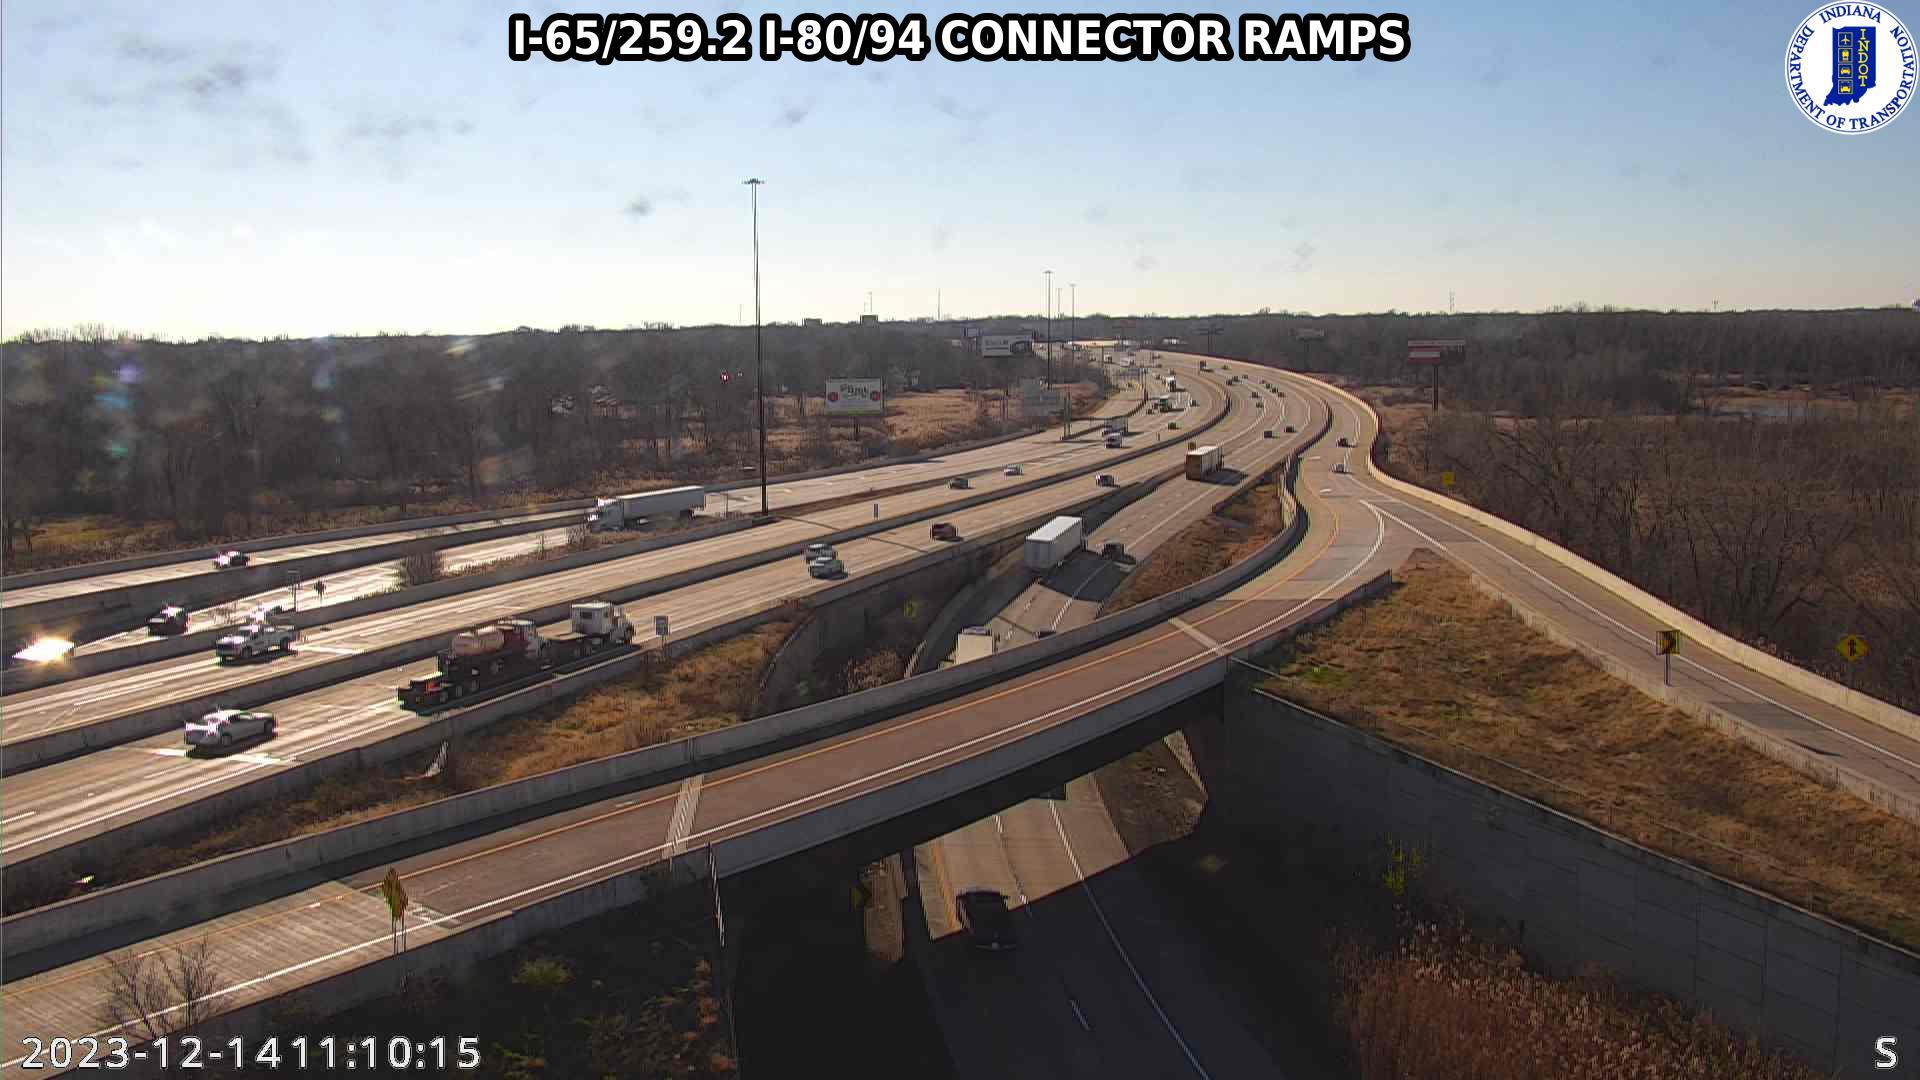 Traffic Cam Gary: I-65: I-65/259.2 I-80/94 CONNECTOR RAMPS : I-65/259.2 I-80/94 CONNECTOR RAMPS Player